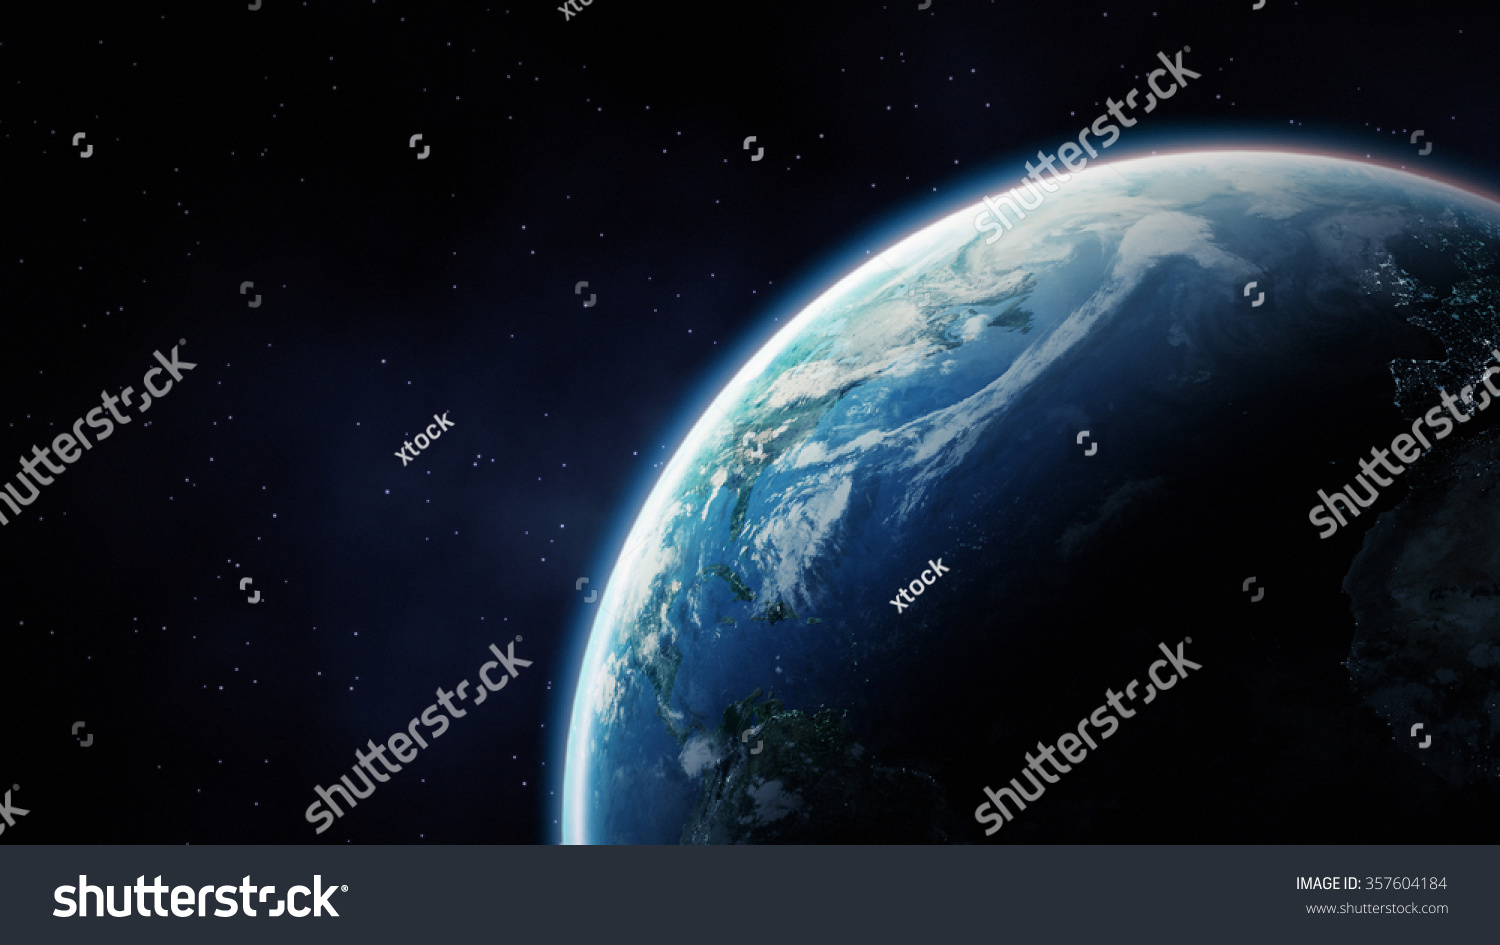 High Resolution Planet Earth view. The World Globe from Space in a star field showing the terrain and clouds. Elements of this image are furnished by NASA #357604184